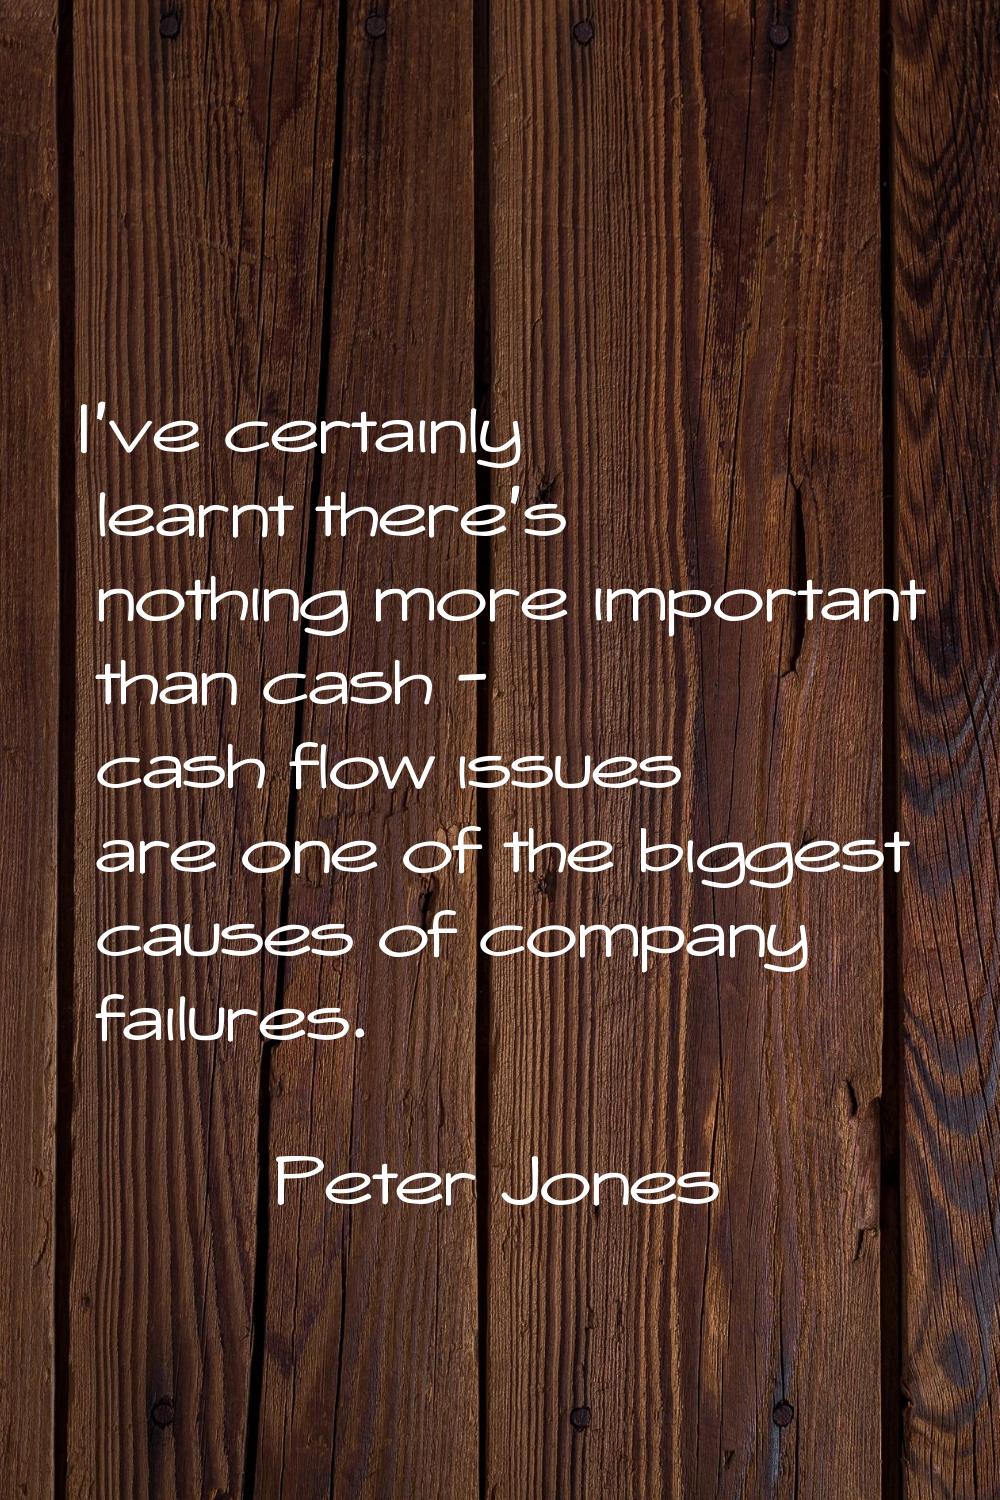 I've certainly learnt there's nothing more important than cash - cash flow issues are one of the bi